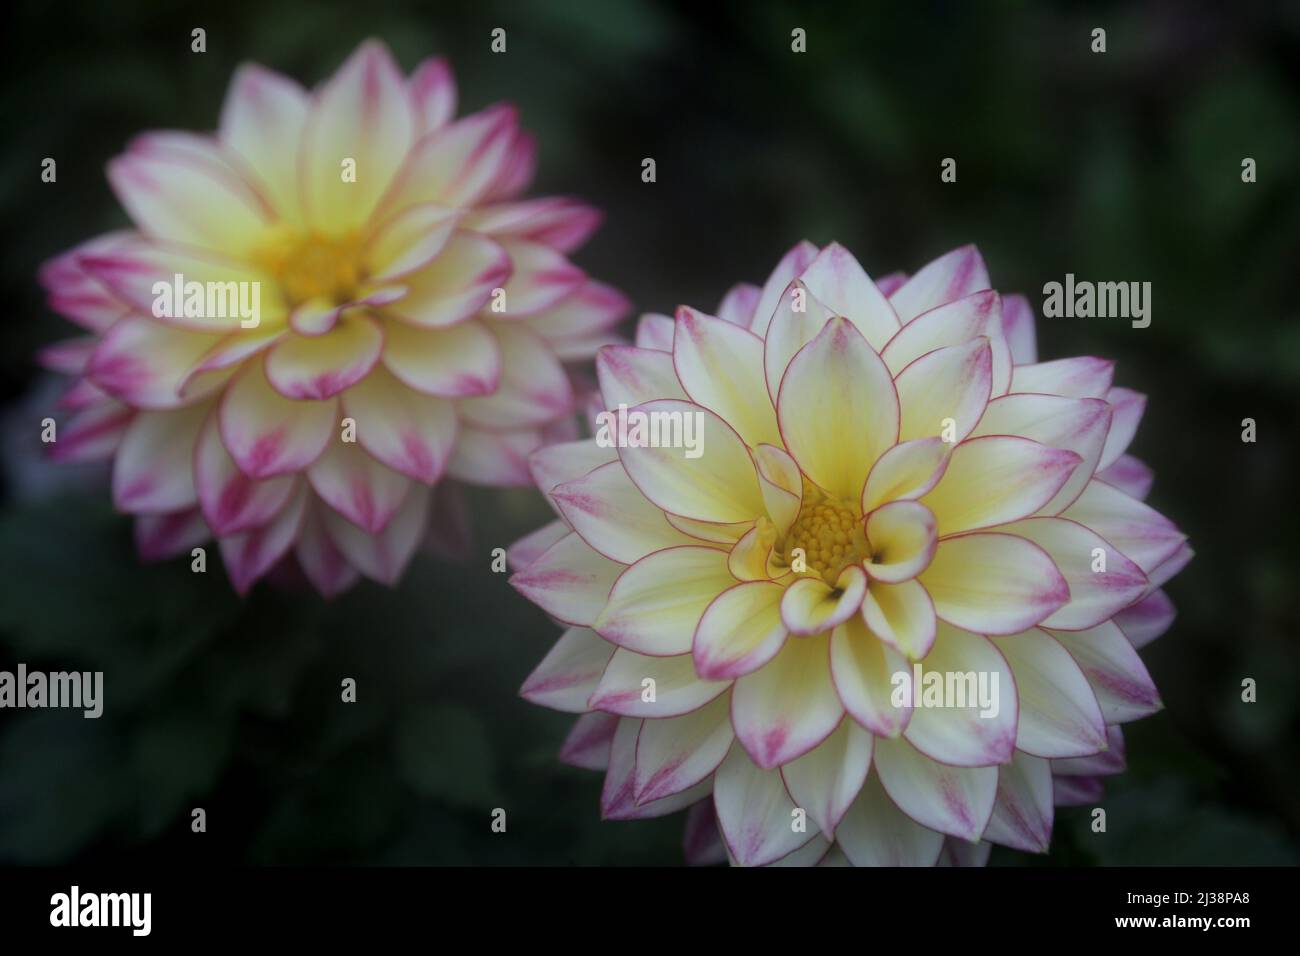 A dahlia flower features white petals edged in purple. Stock Photo